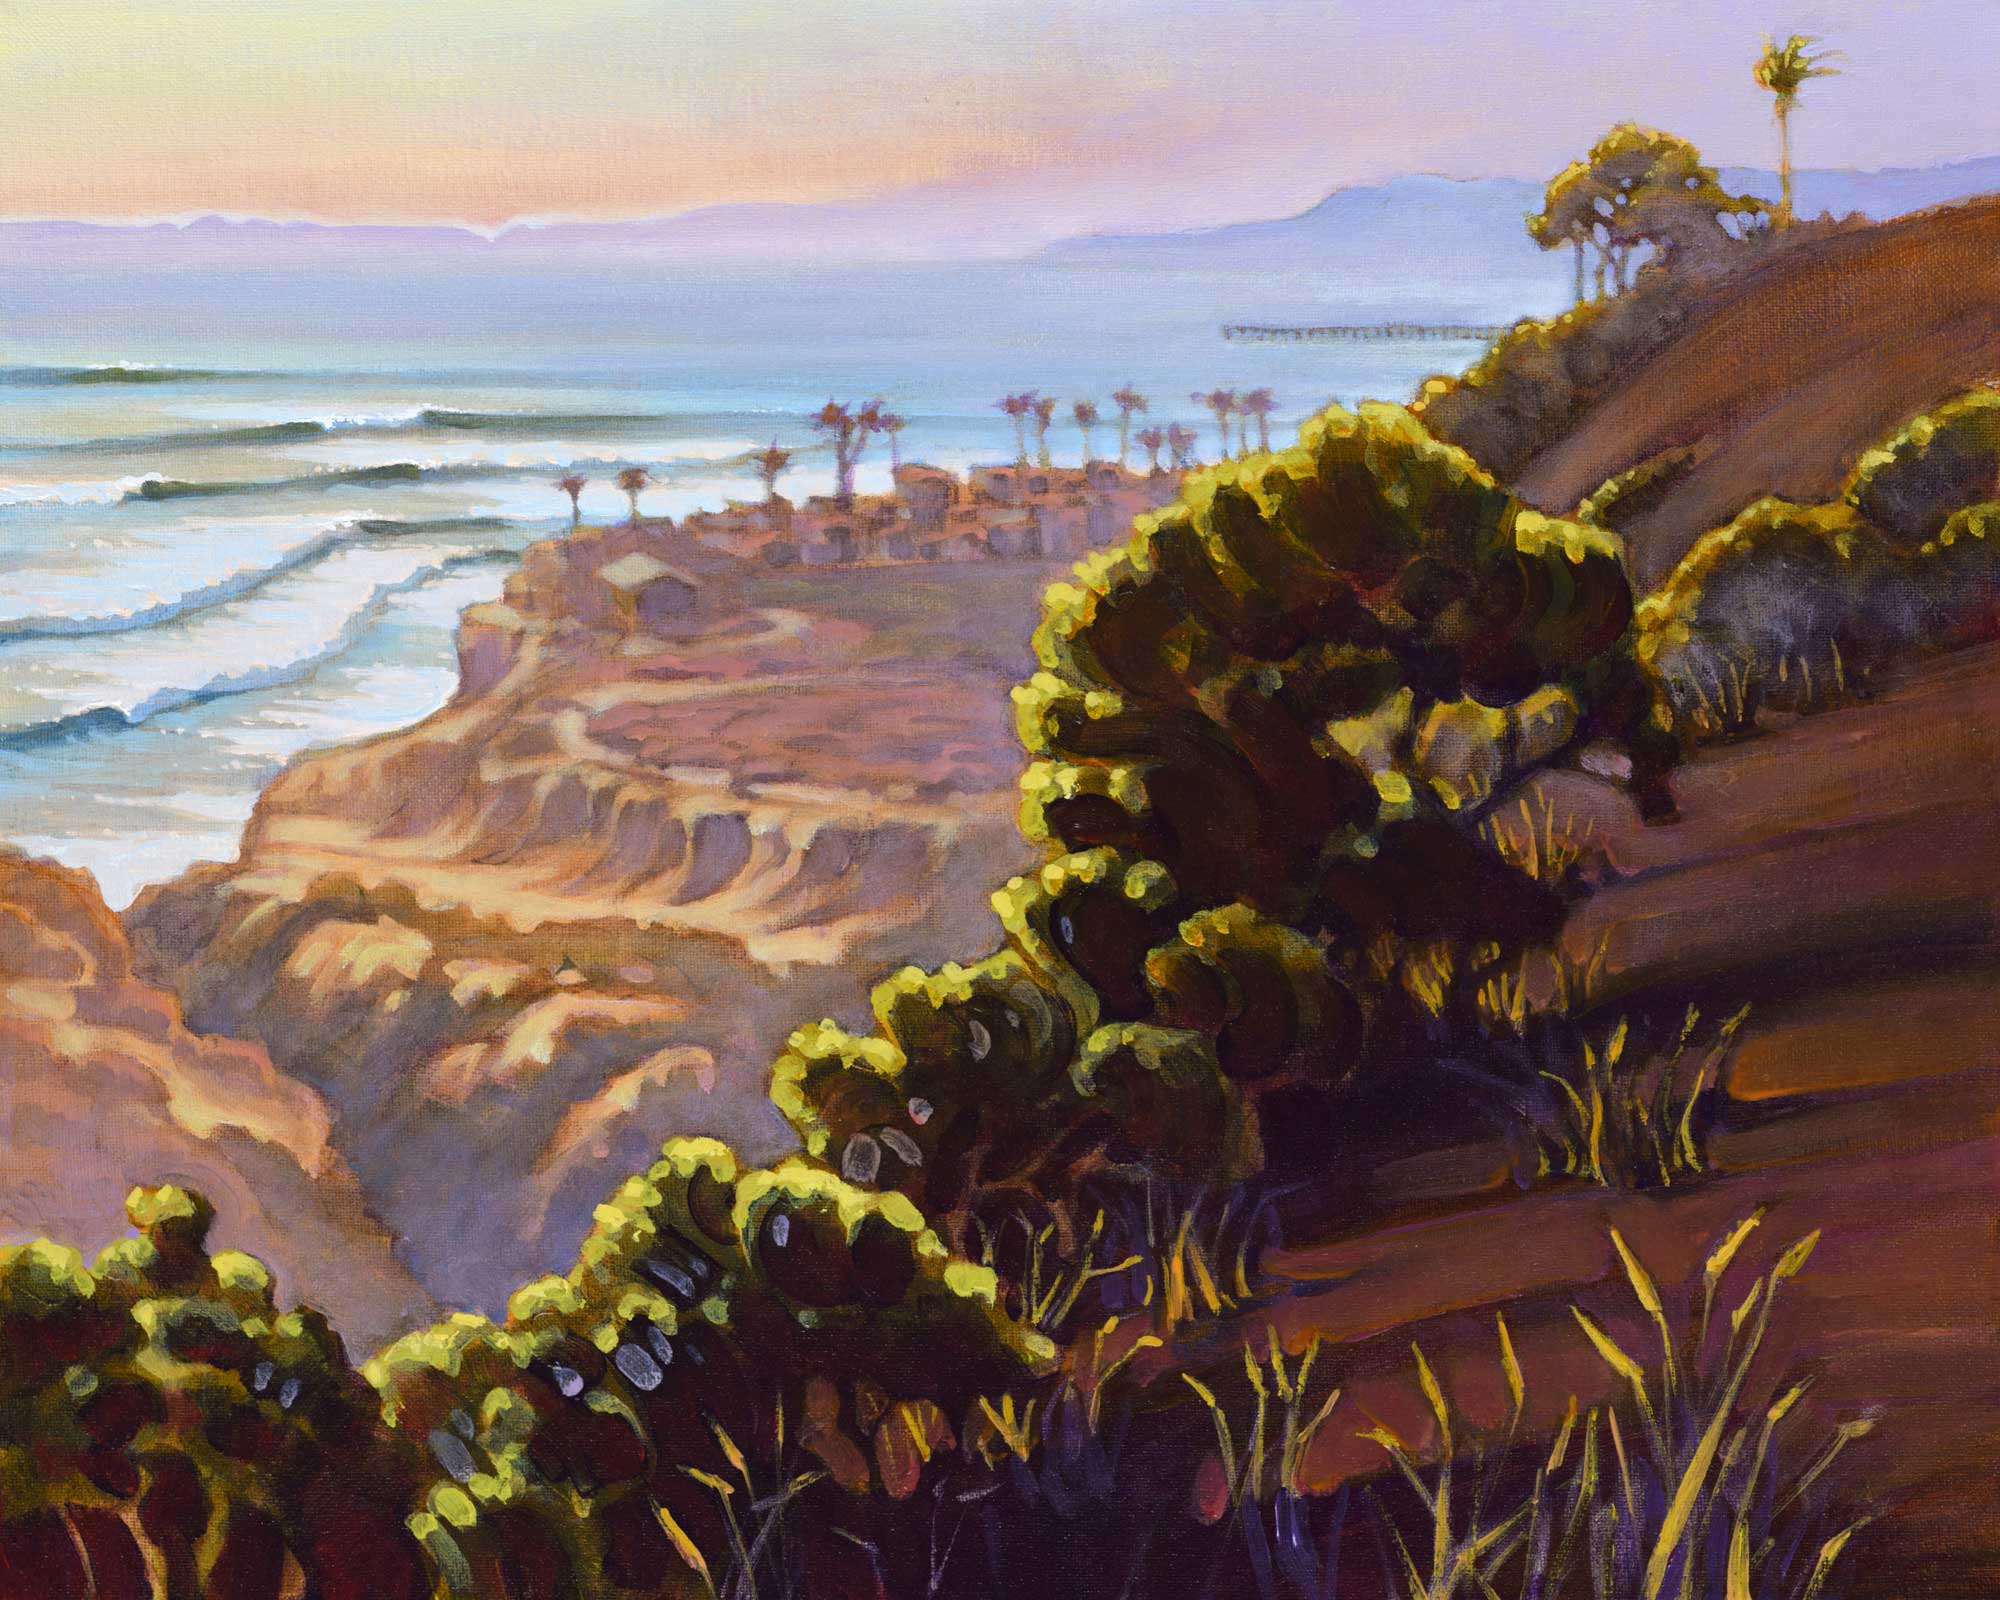 Plein air painting of a sunset over Sunset Cliffs in Pt. Loma on the San Diego coast of California